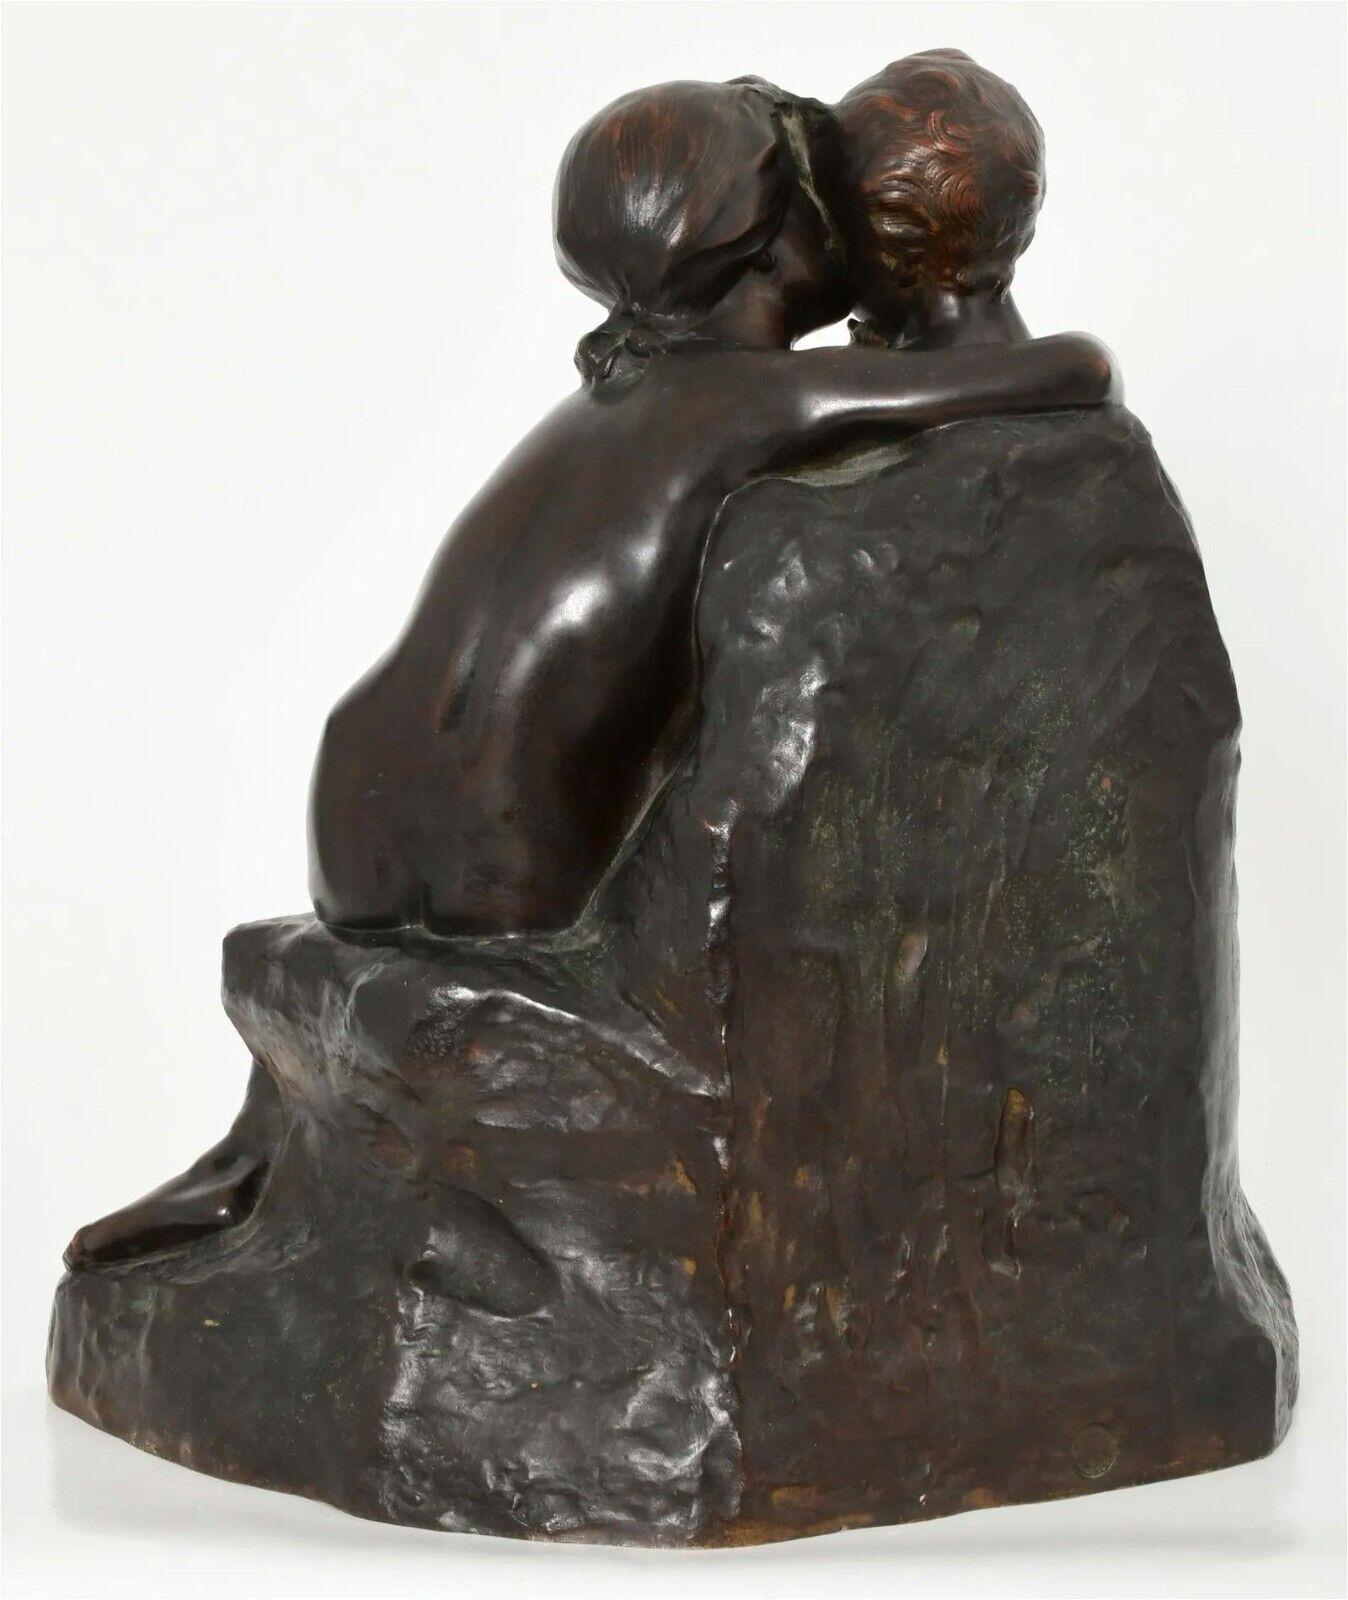 20th Century Antique French Bronze Sculpture of Sisters by Henri Pernot (1859-1937)